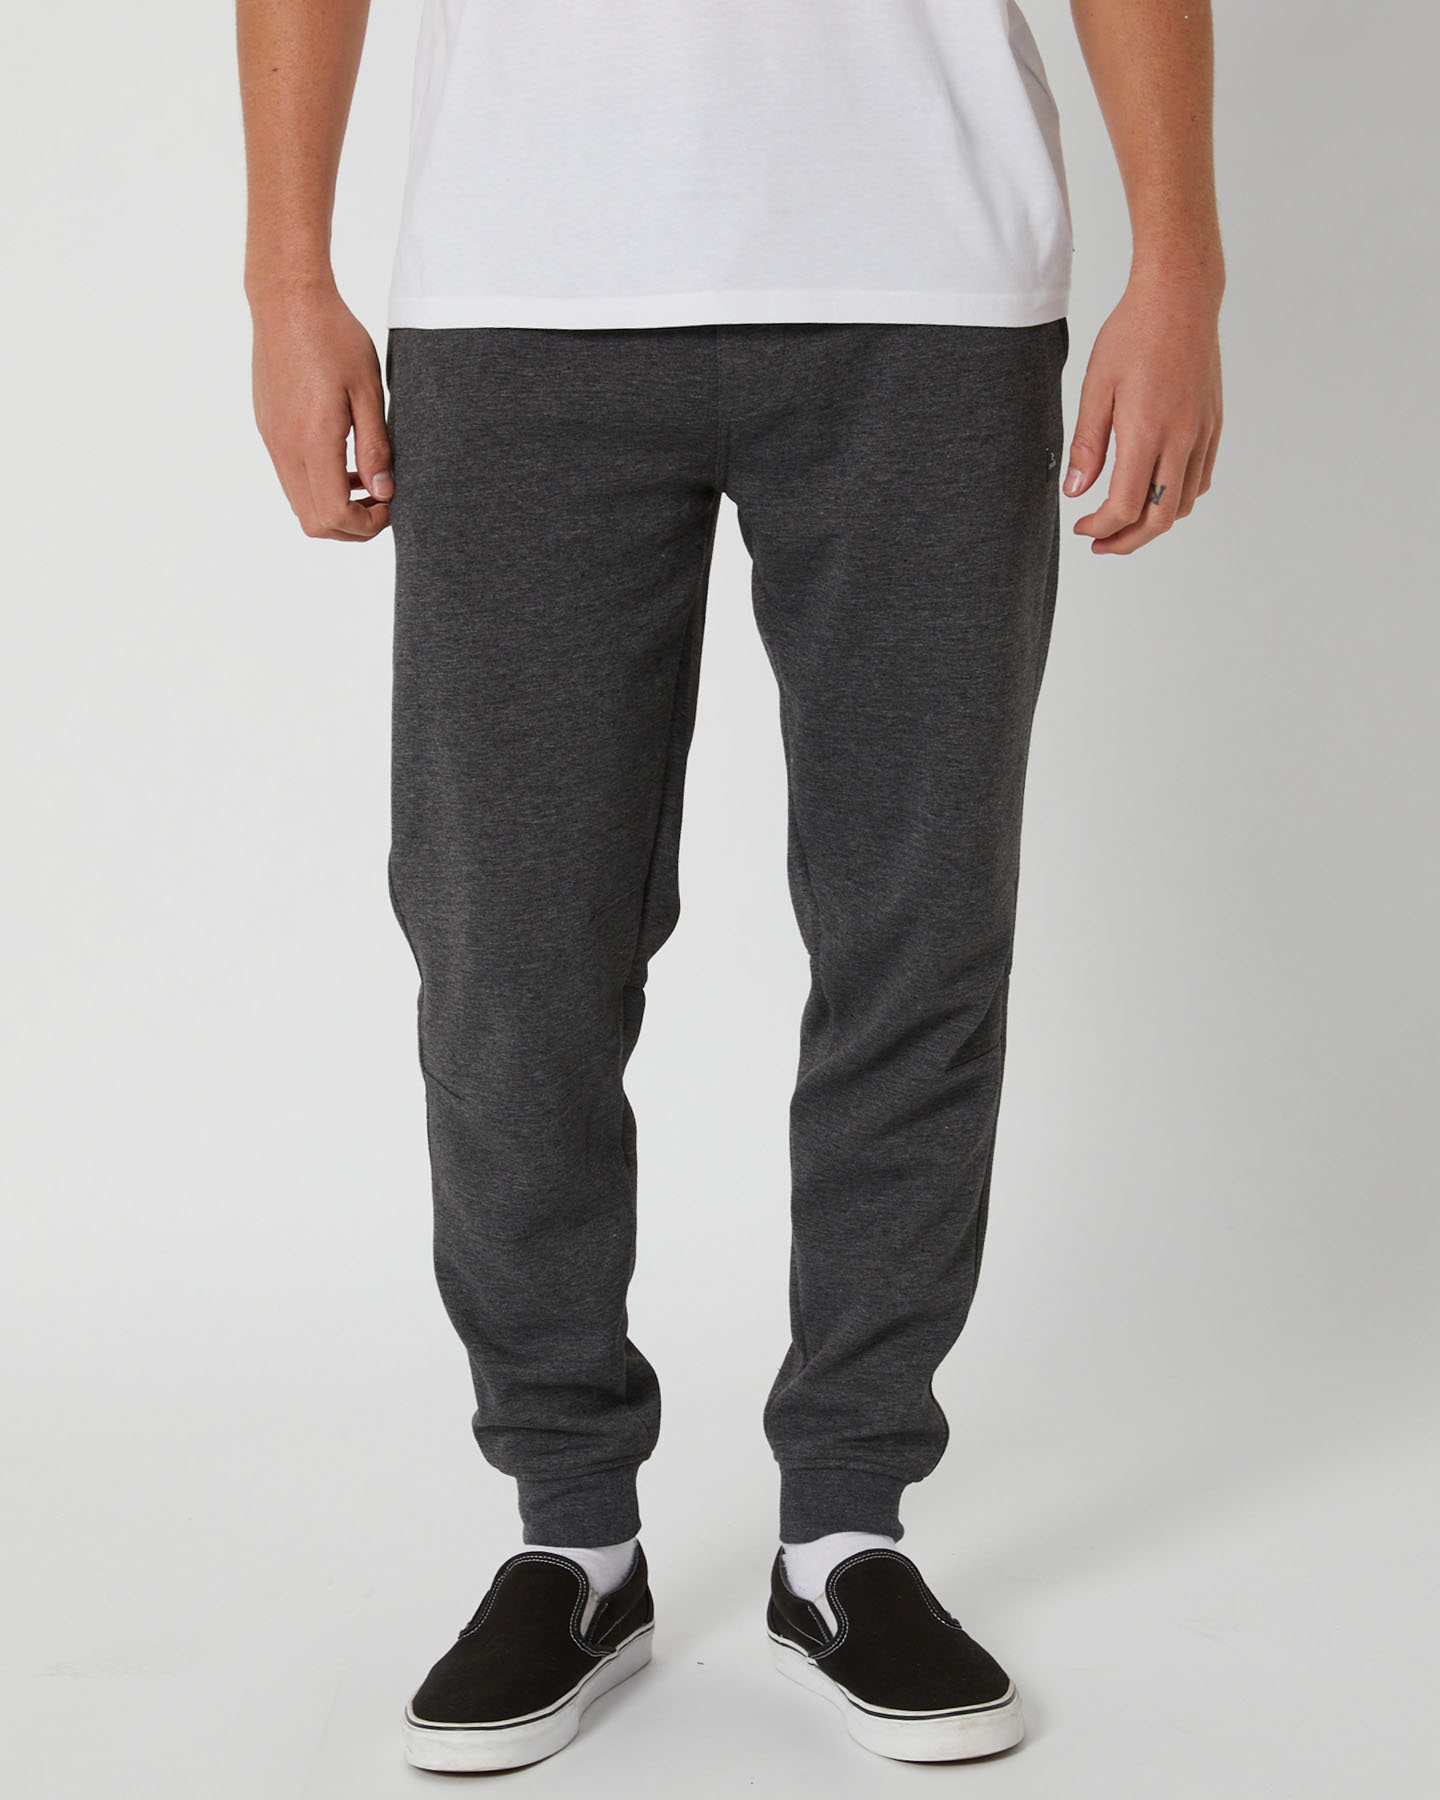 Rip Curl Anti Series Departed Mens Trackpant - Charcoal Grey | SurfStitch